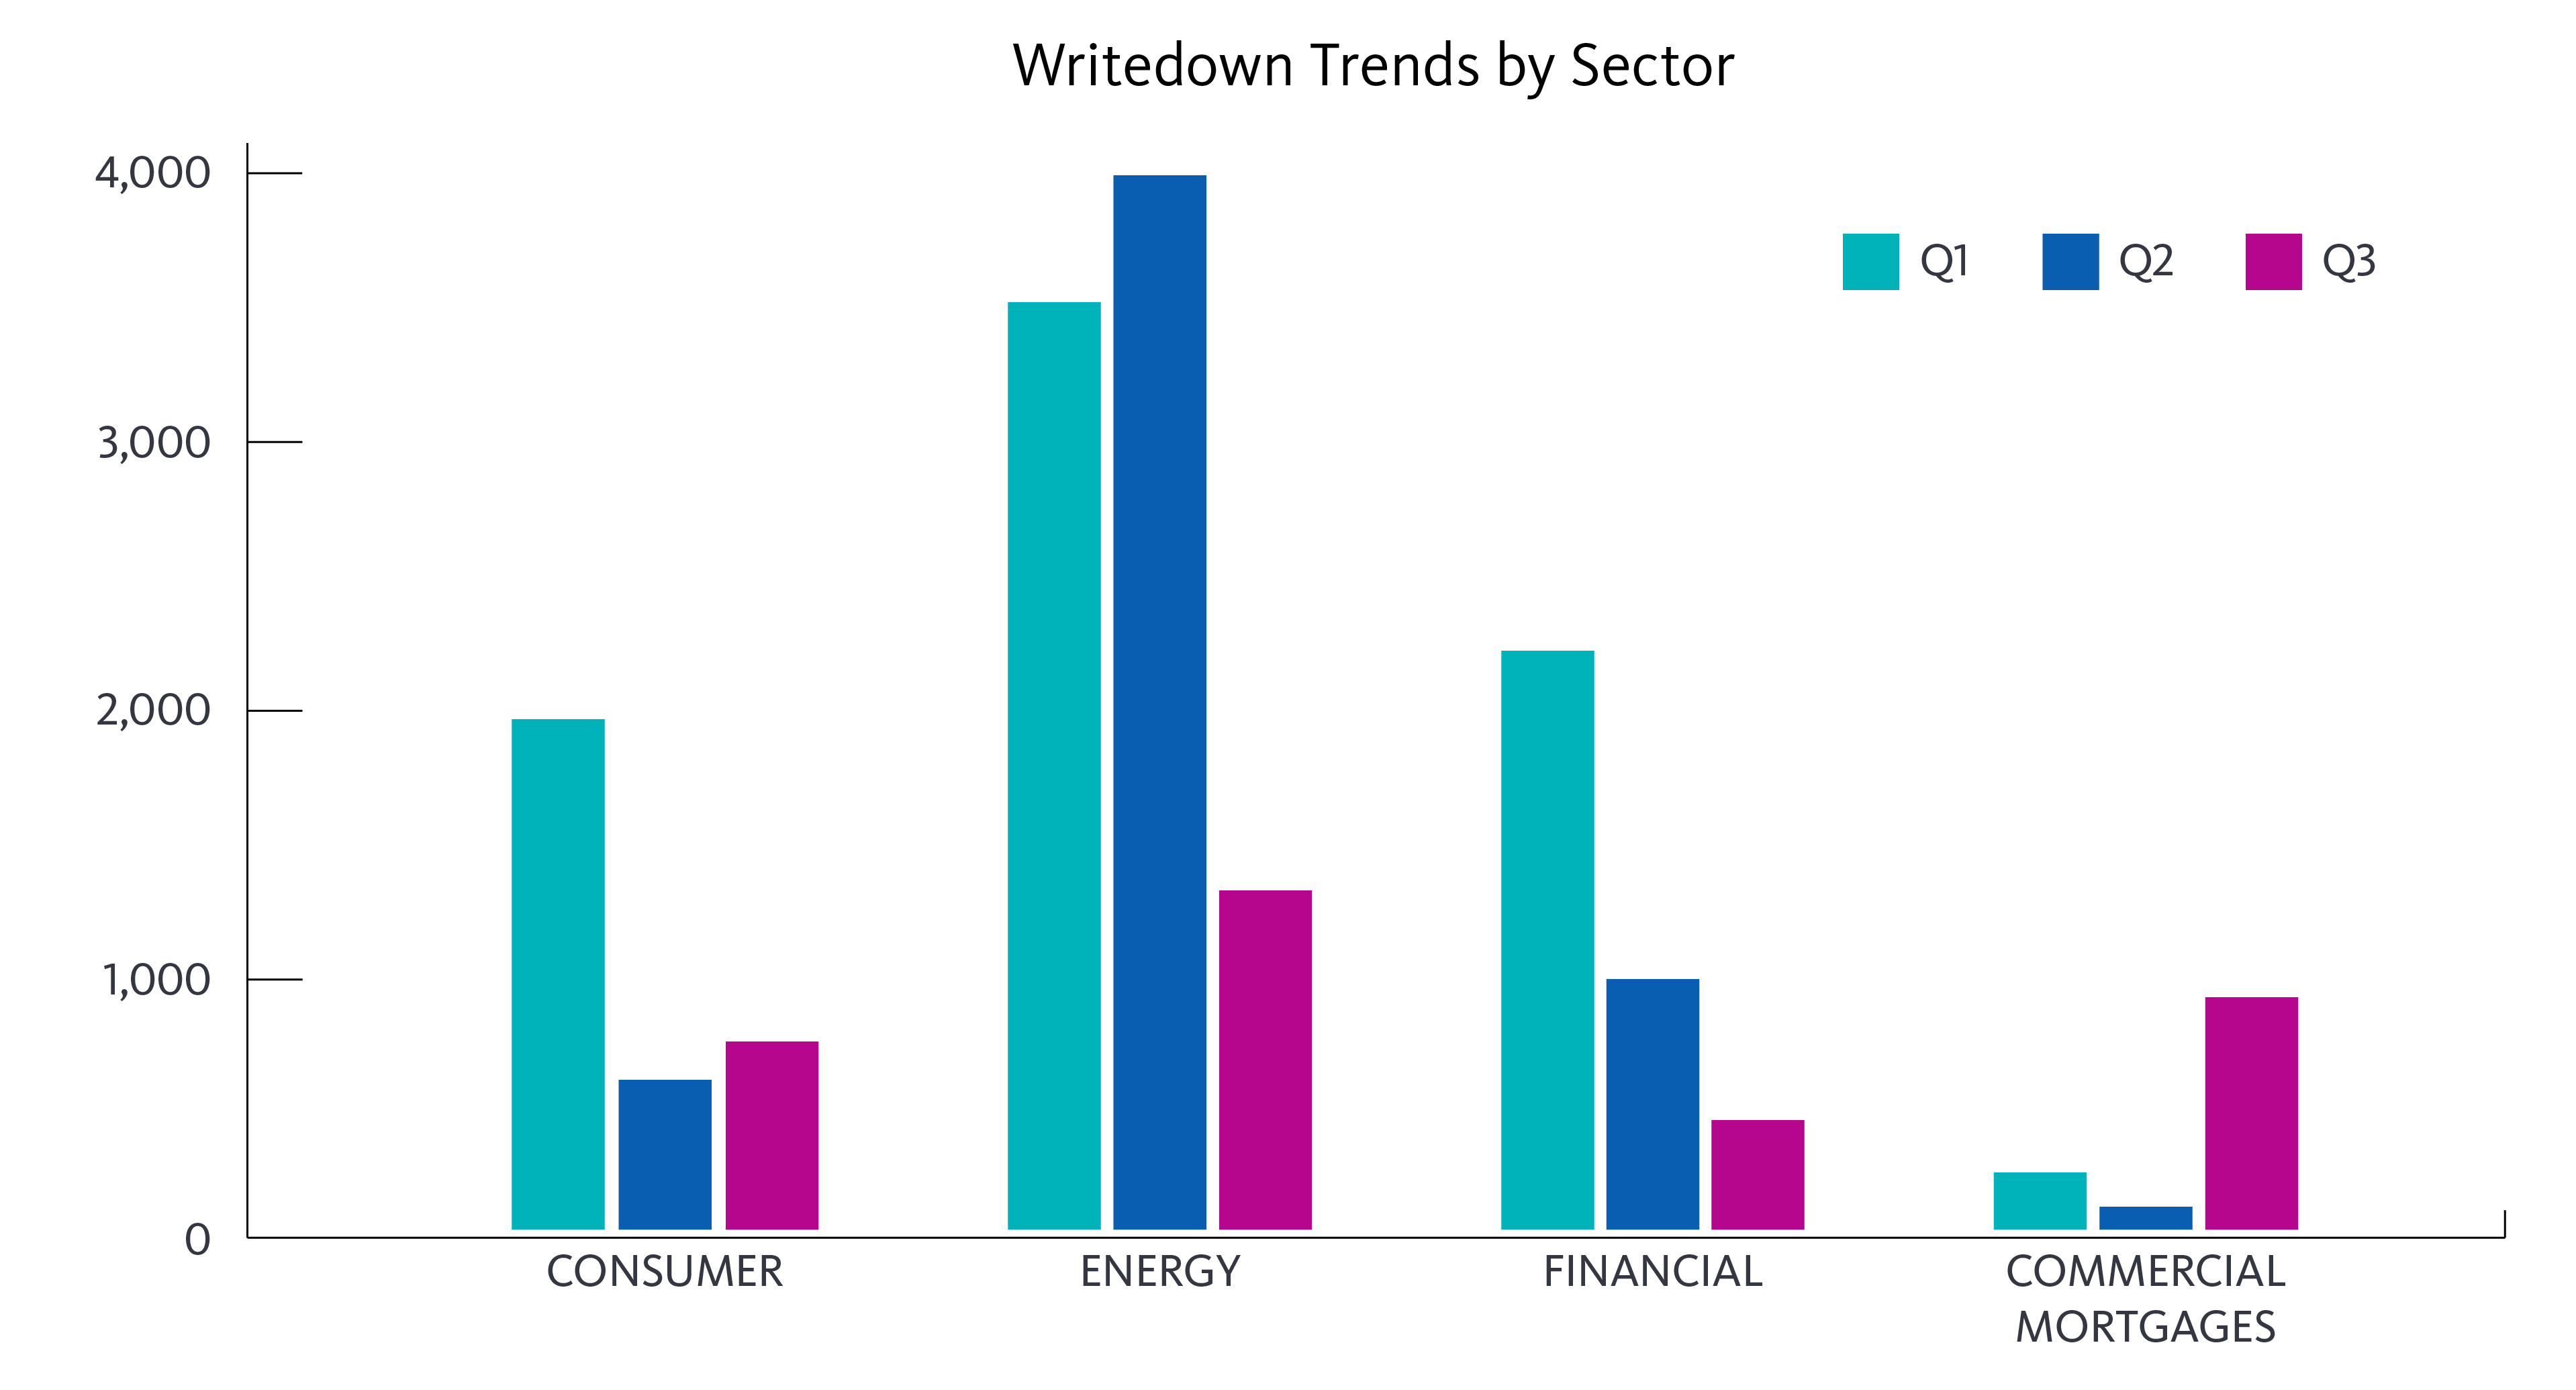 Writedown trends by sector